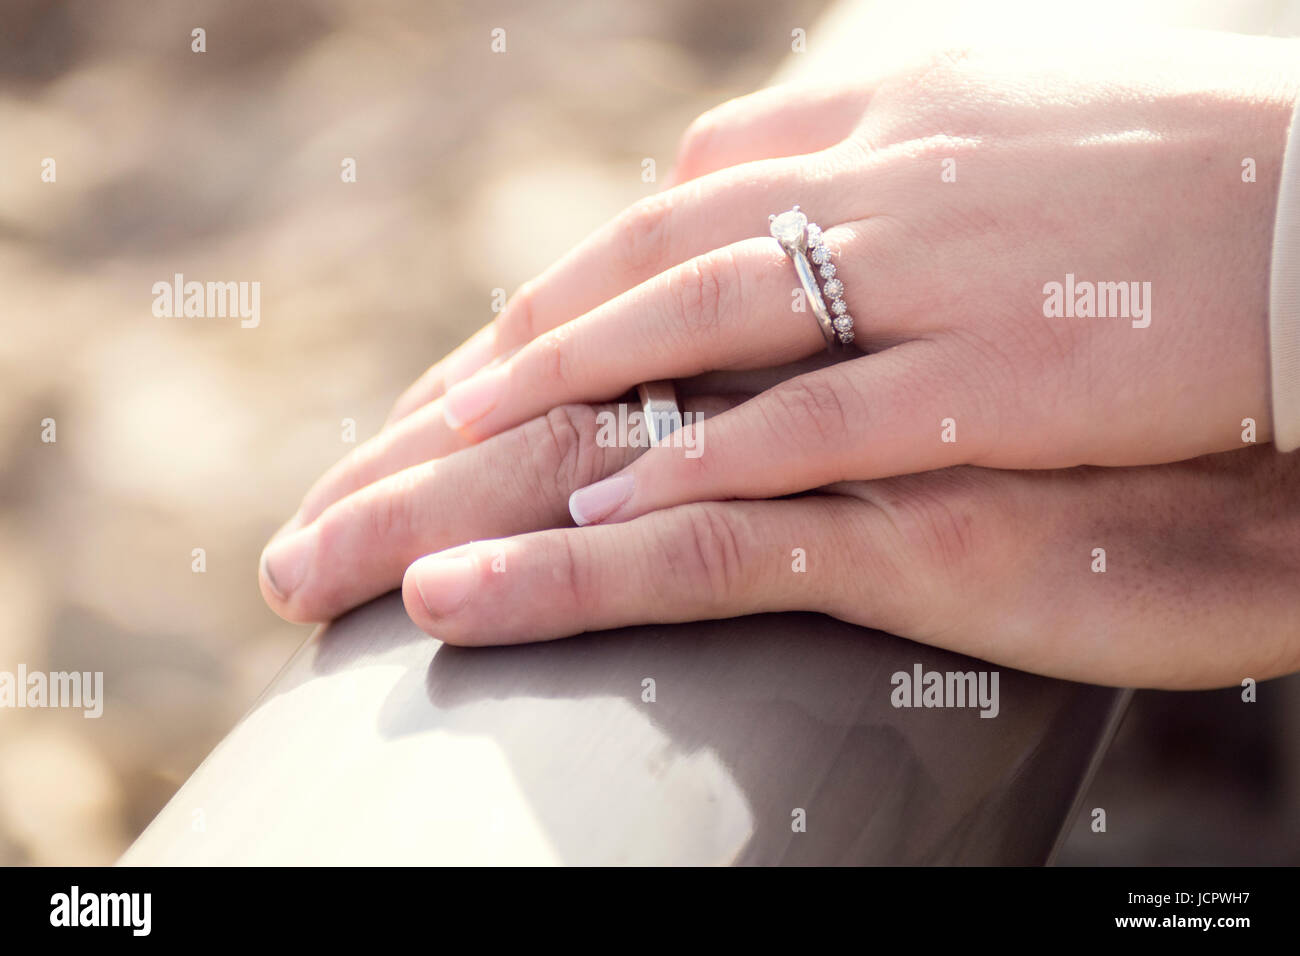 Hands Of A Just Married Couple With The Wedding Rings Stock Photo -  Download Image Now - iStock